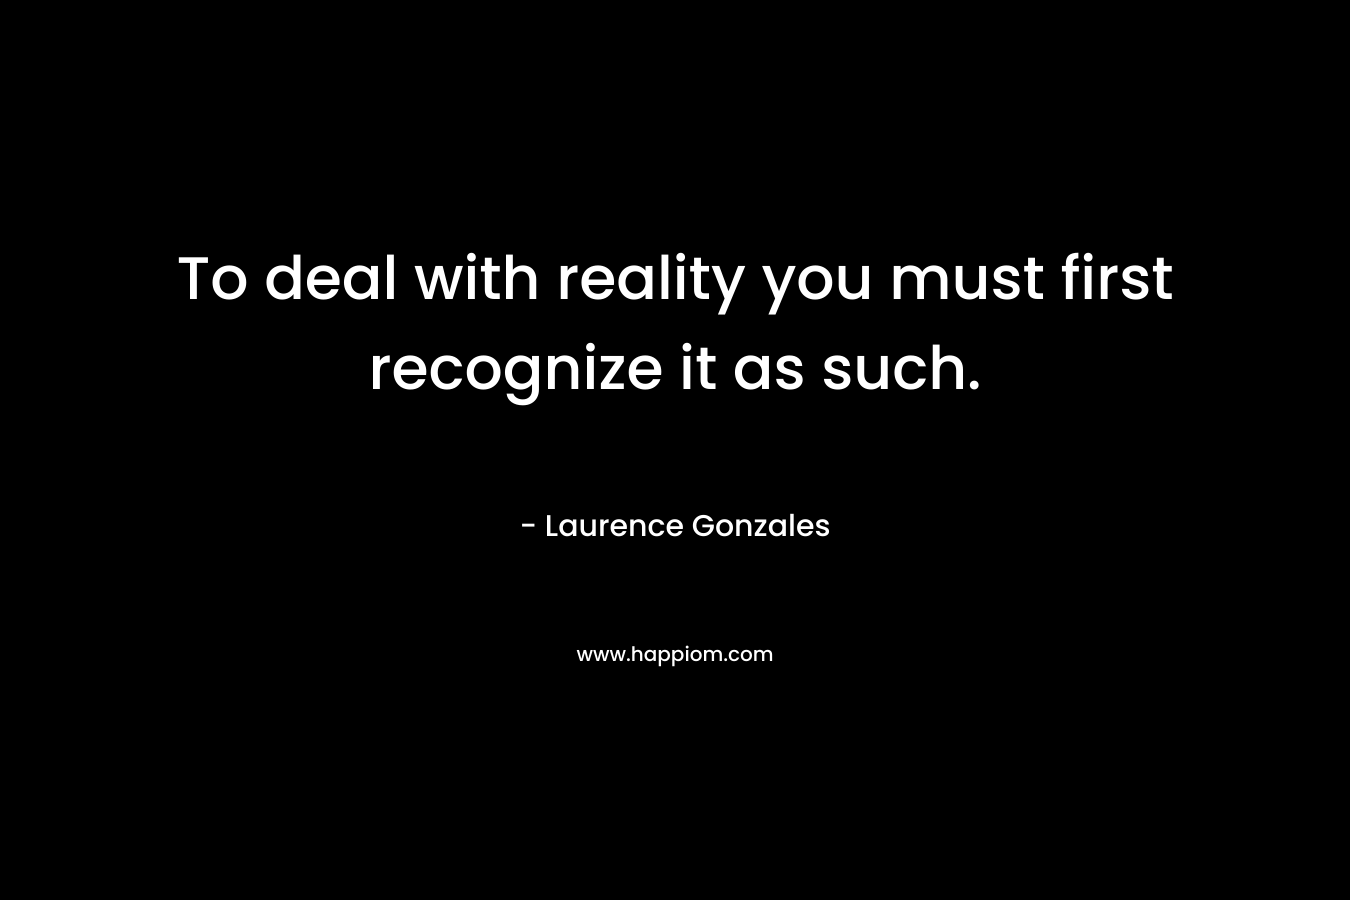 To deal with reality you must first recognize it as such.